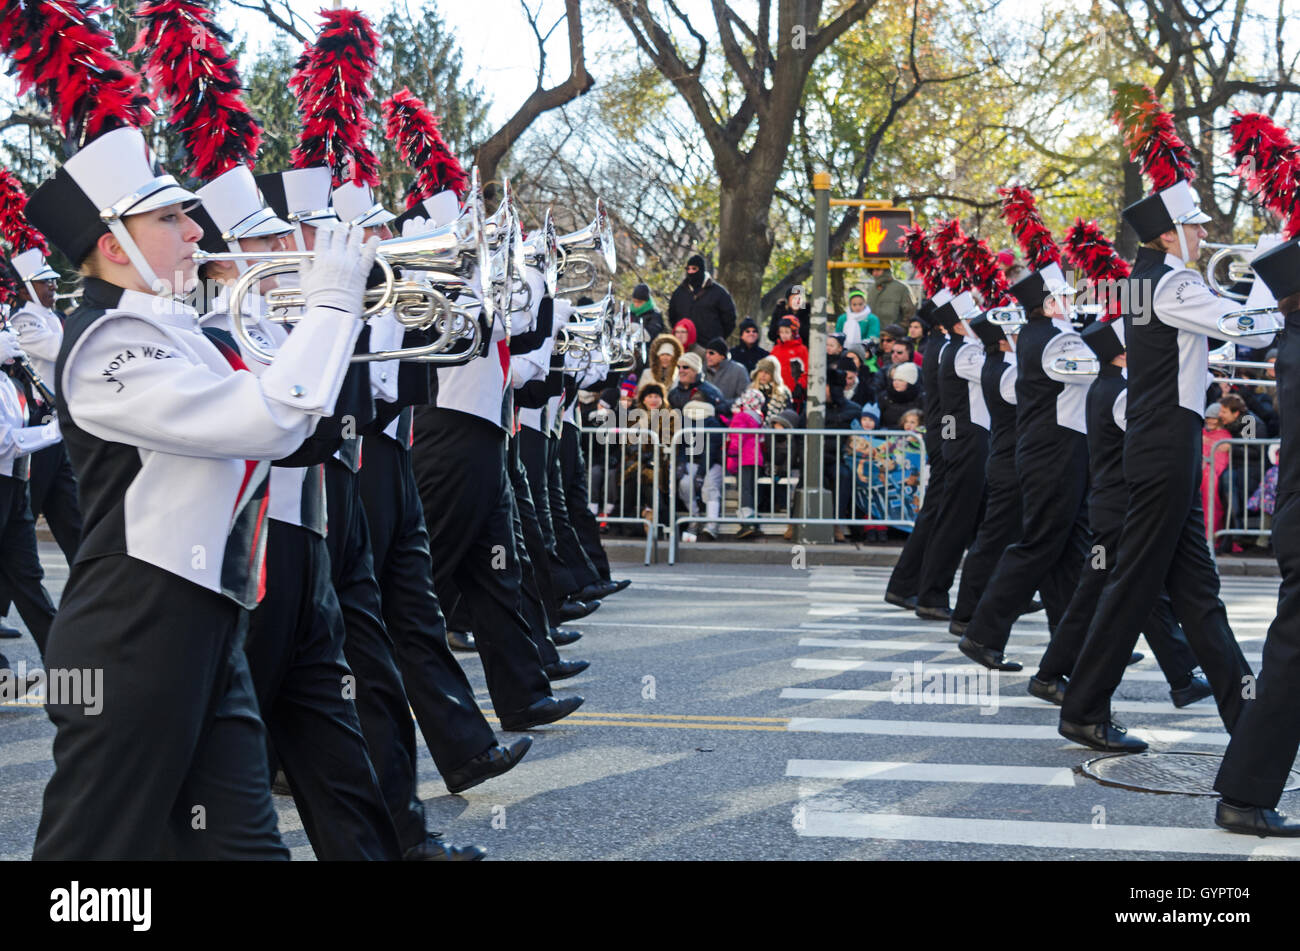 Brass players of the Marching Firebirds of Lakota West in Macy's Thanksgiving Day Parade, New York City. Stock Photo